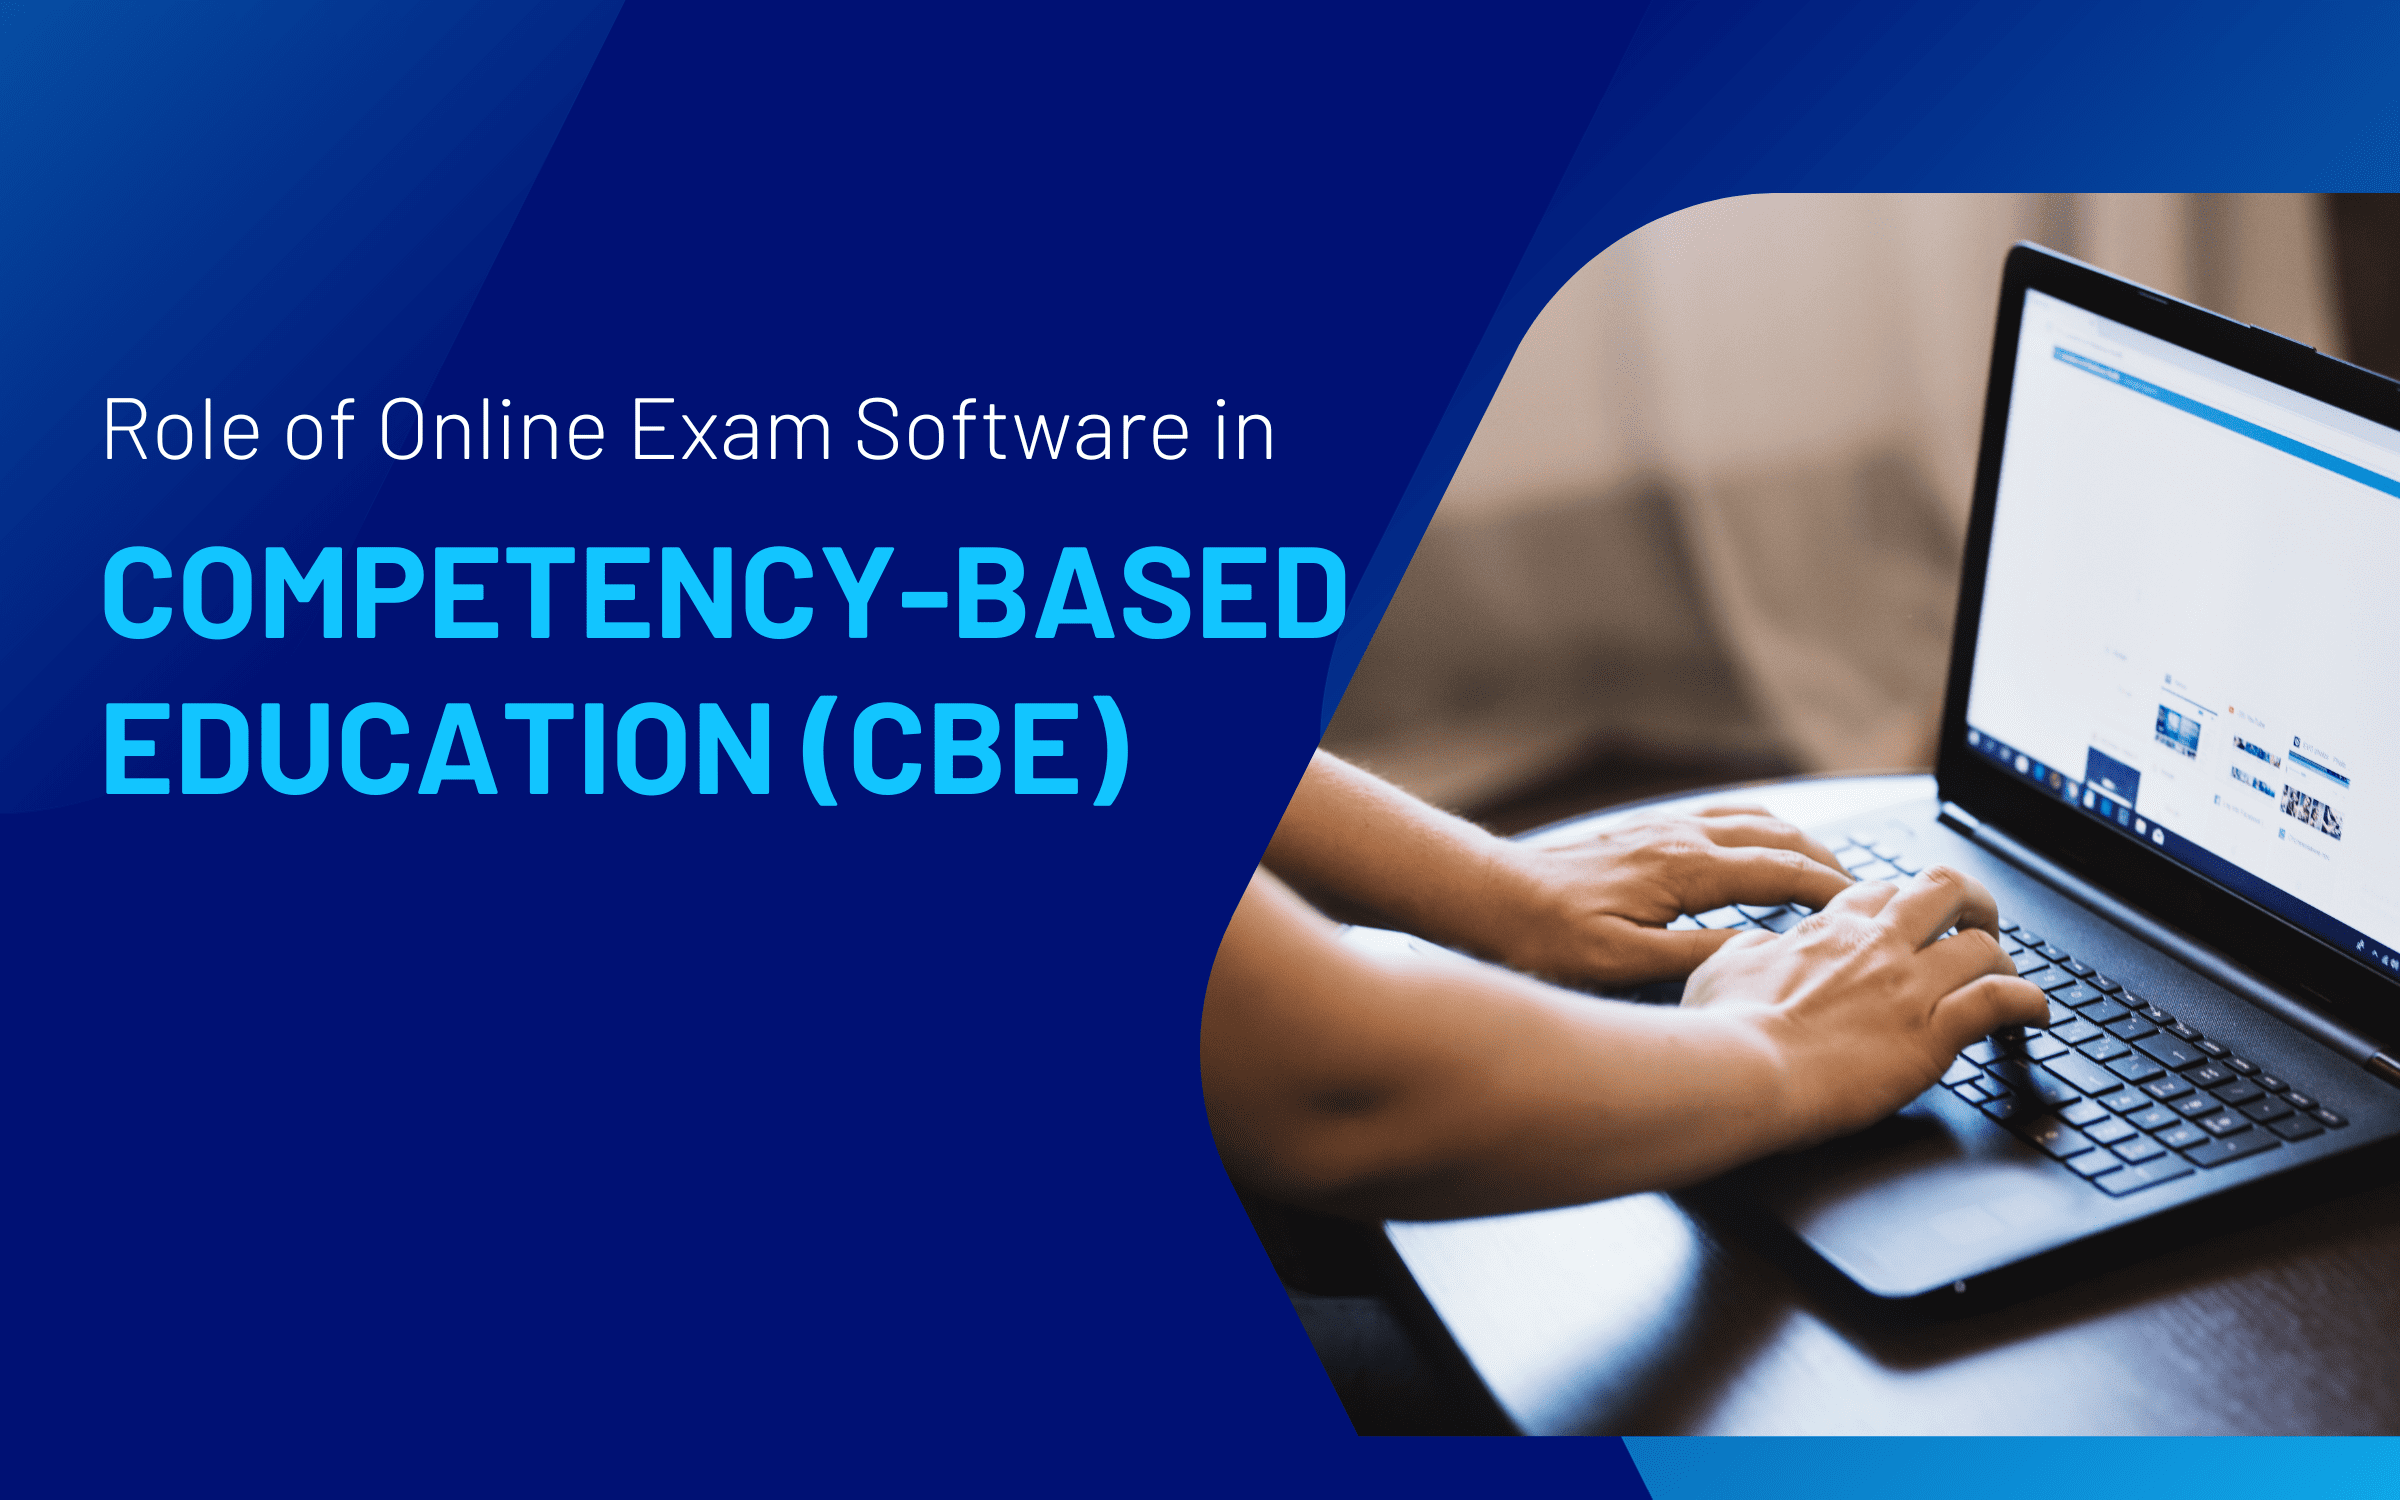 The Role of Online Exam Software in Competency-Based Education